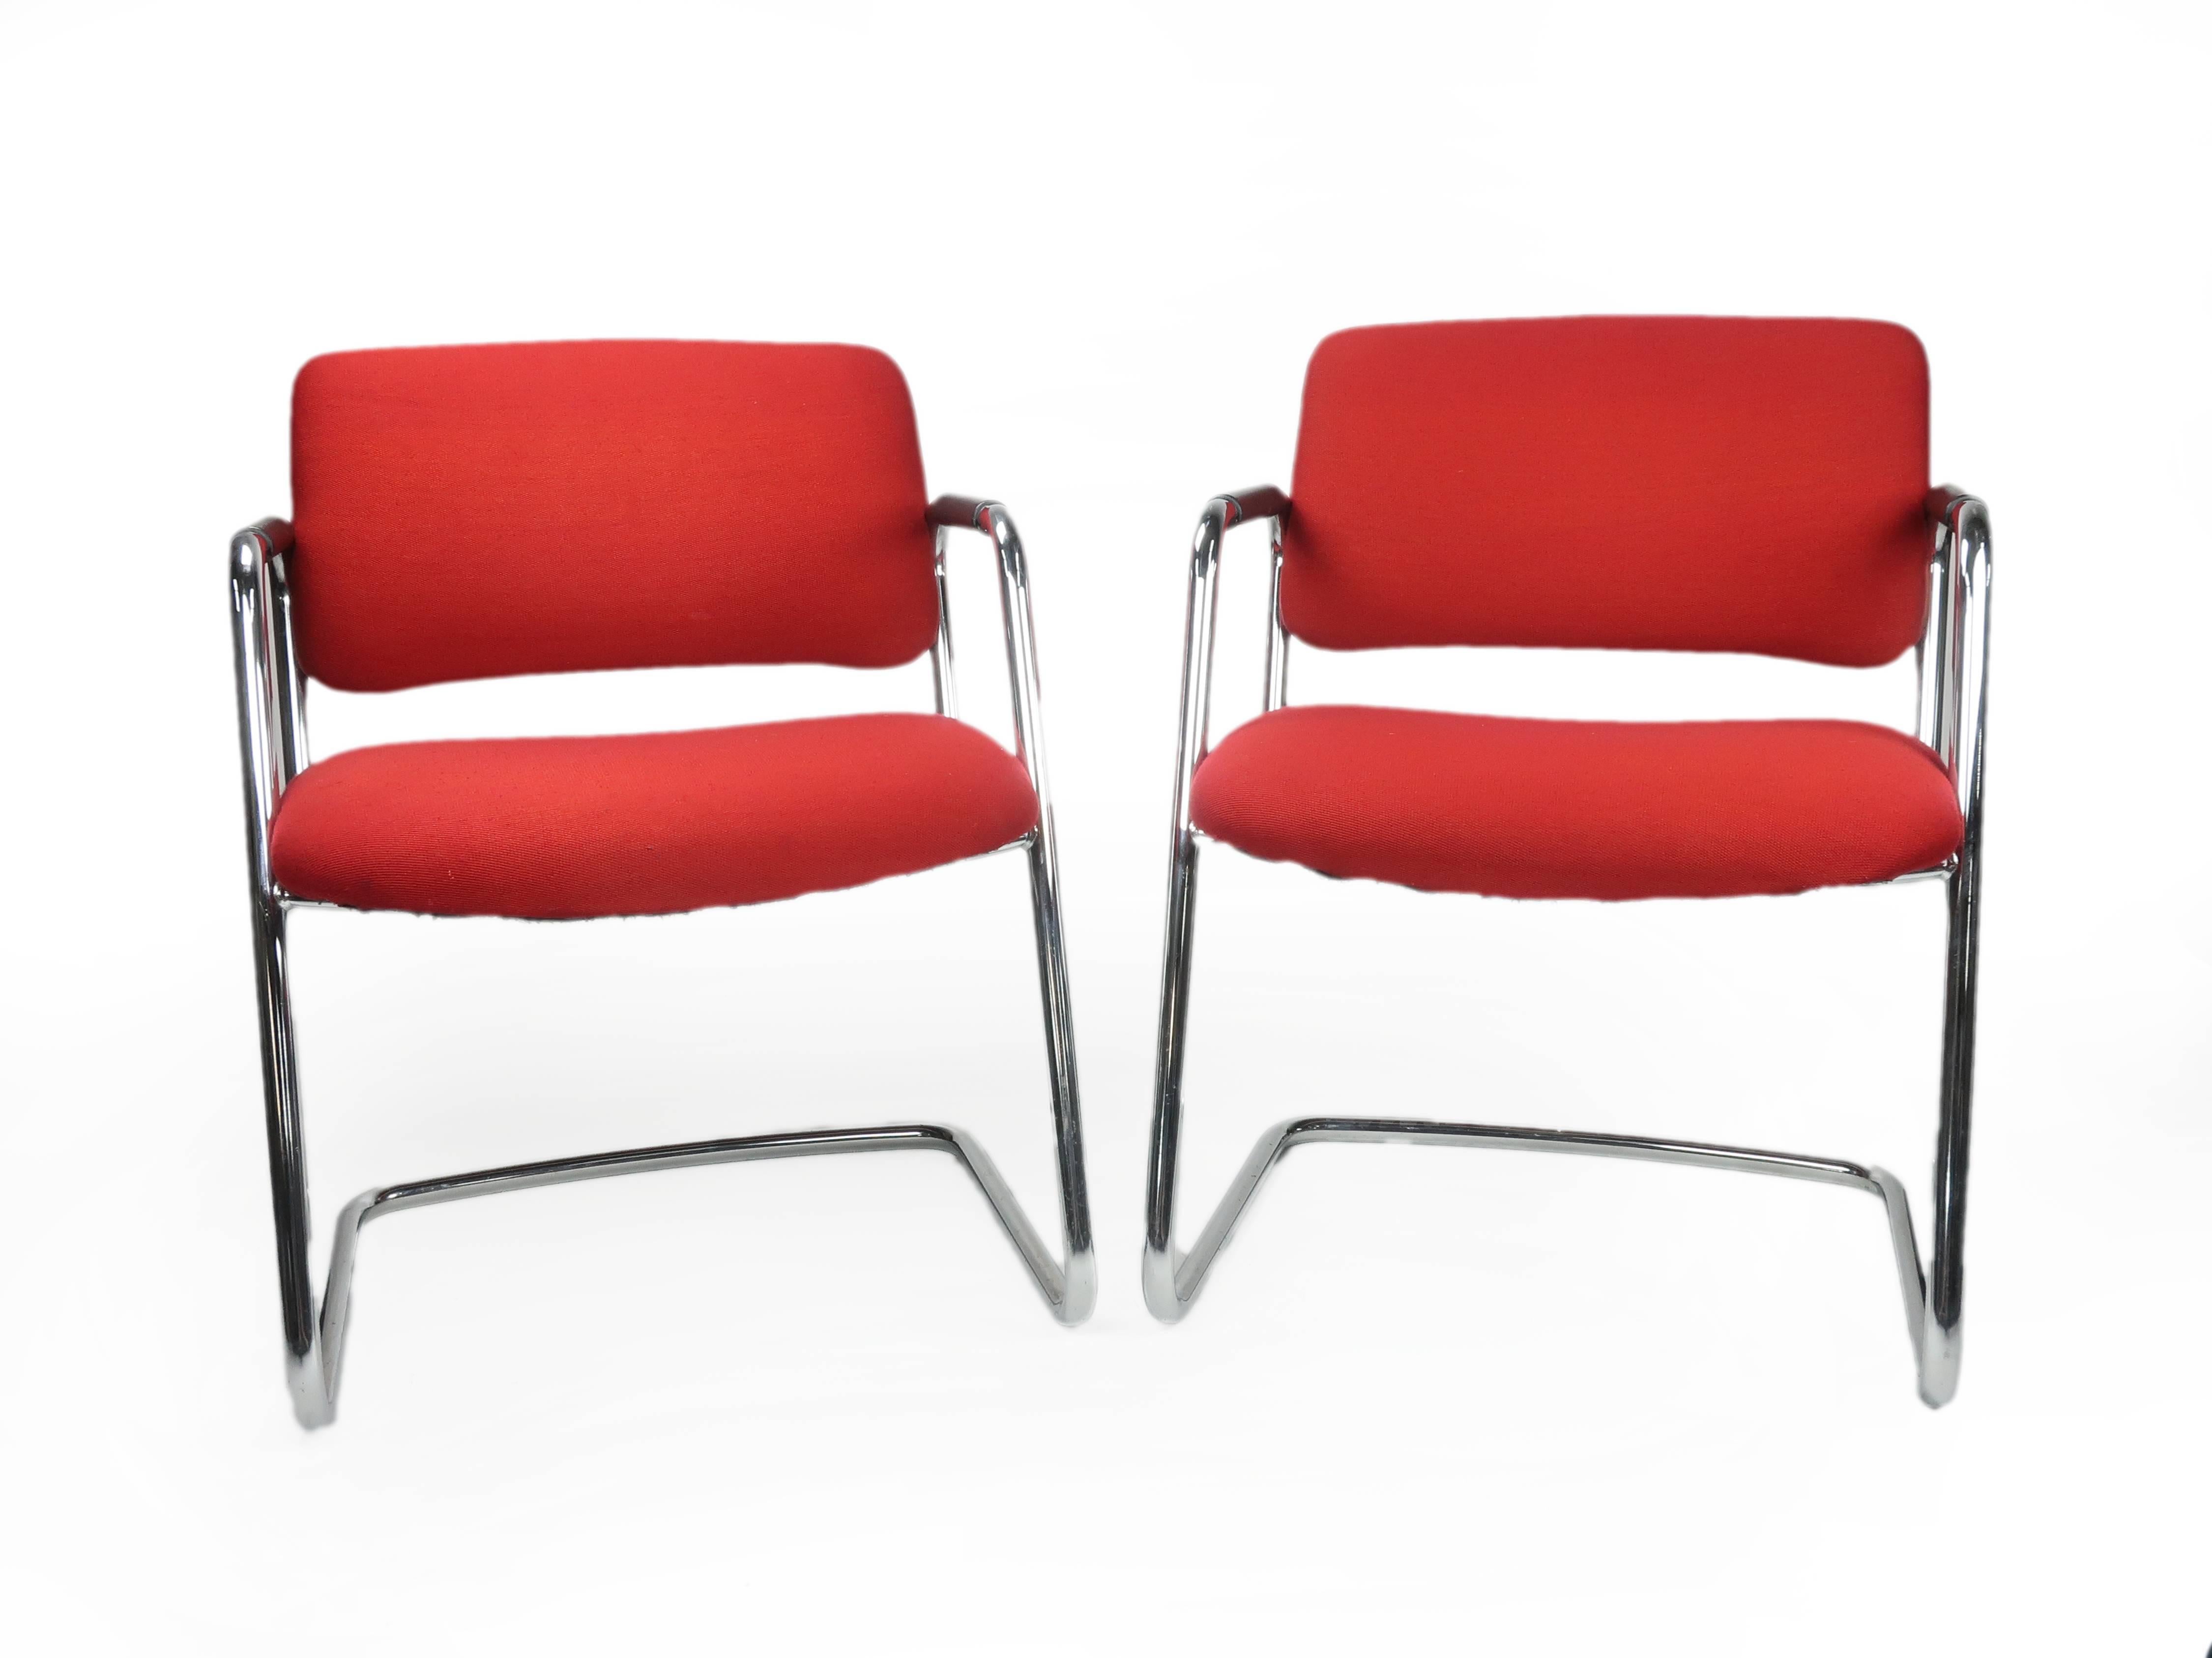 A pair of wonderful cantilevered vintage Steelcase chairs in chrome and red from the 1970s. They have their original midcentury fabric showing only light age-appropriate wear. Each has a Steelcase label and a lovely shape and heft - perfect for an